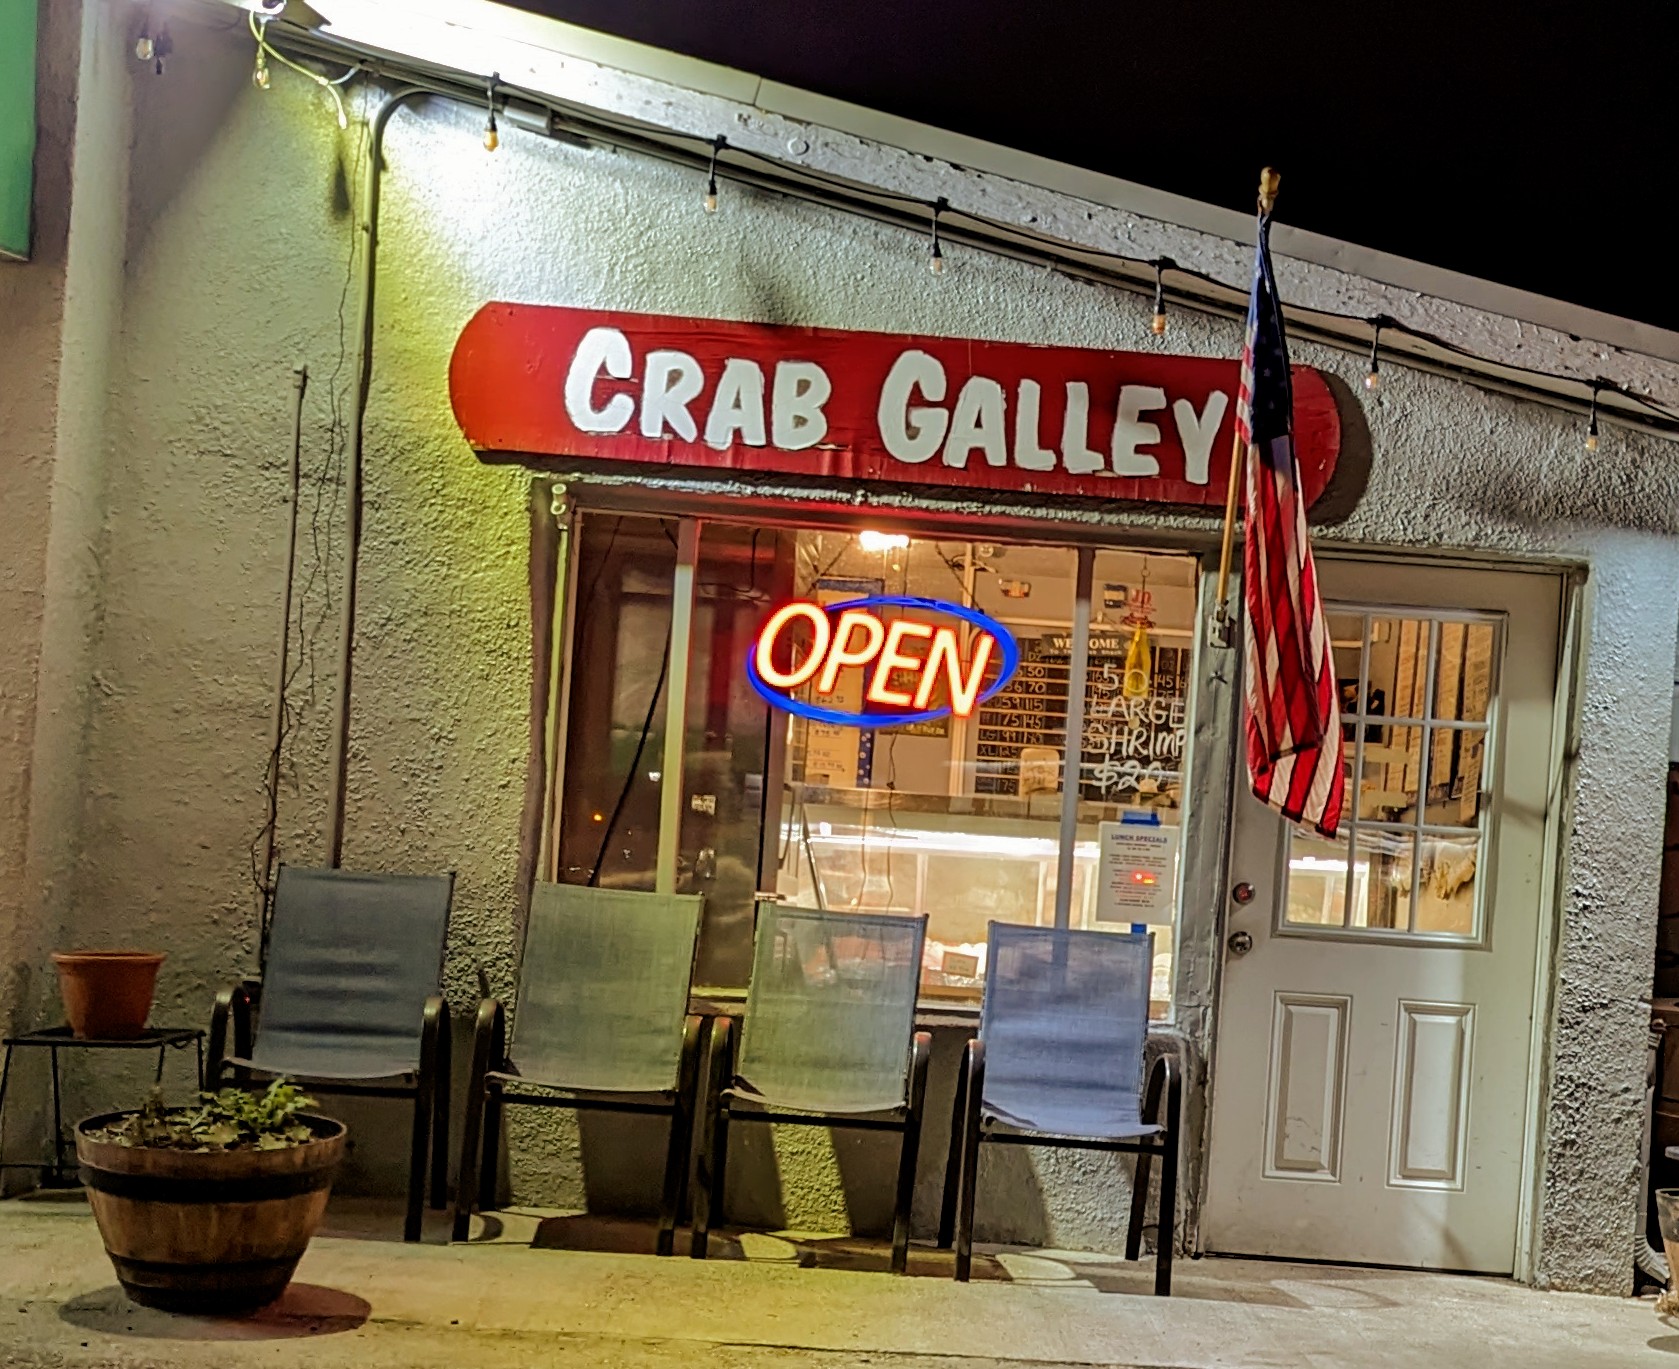 The Crab Galley (ODENTON location)